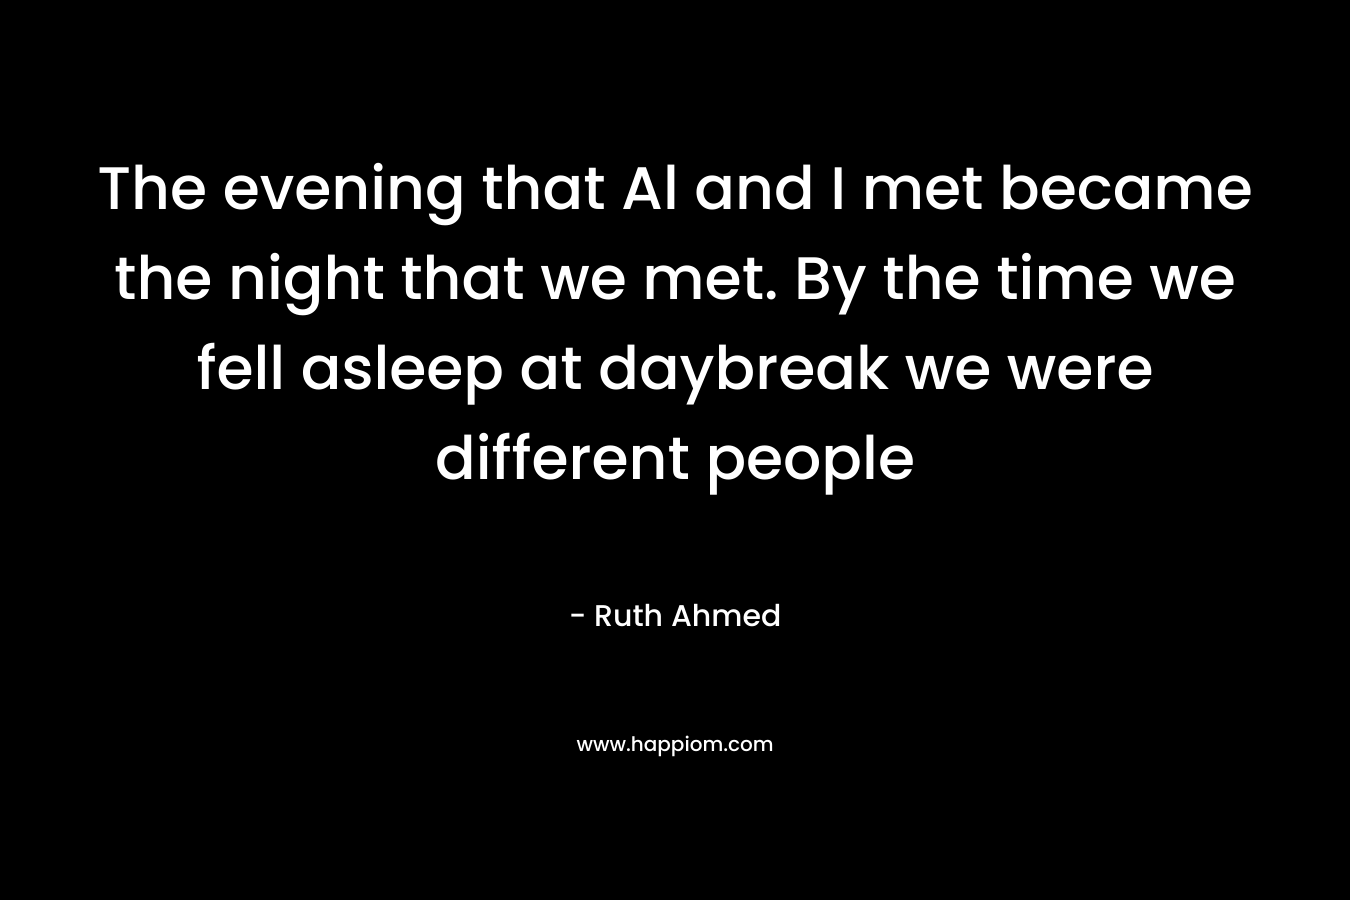 The evening that Al and I met became the night that we met. By the time we fell asleep at daybreak we were different people – Ruth Ahmed